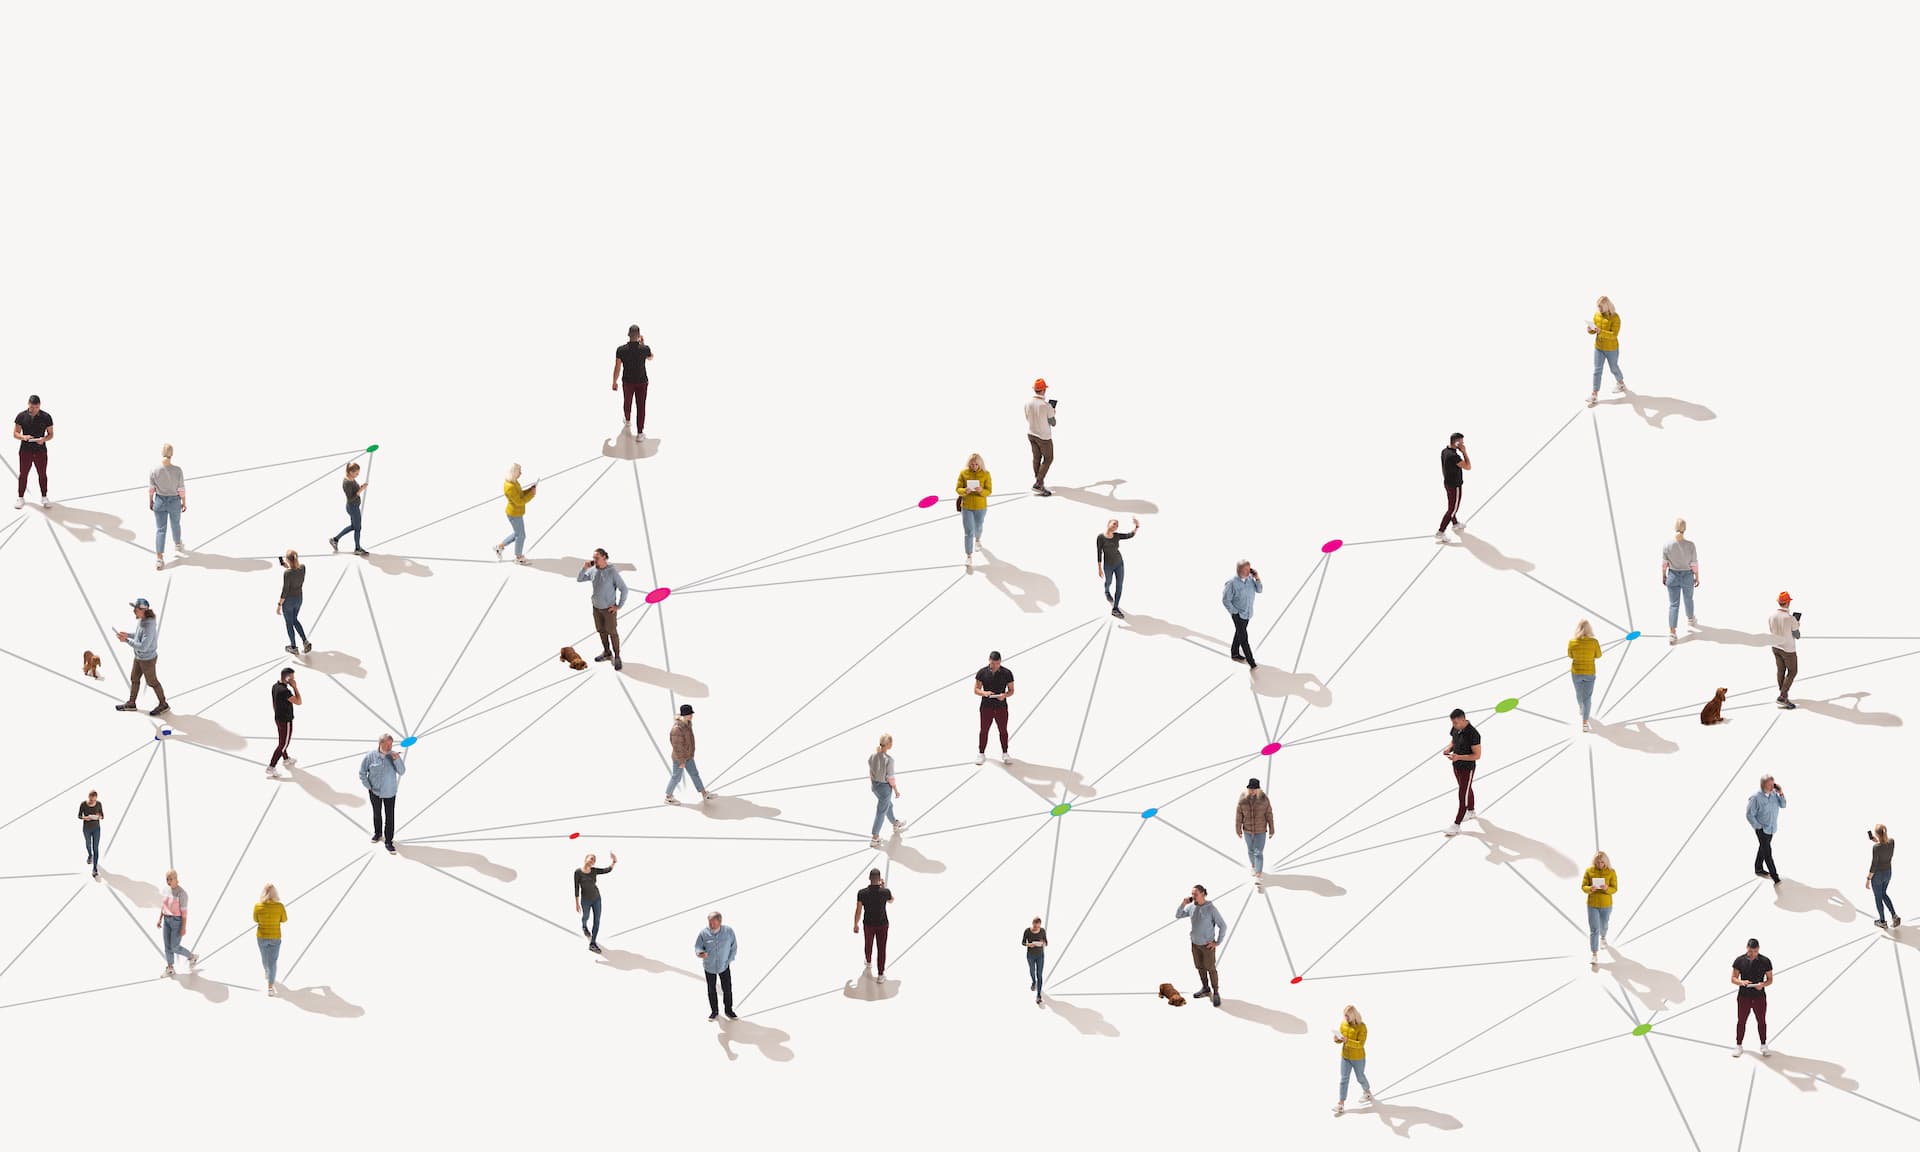 An aerial view of a crowd of people connected by lines, illustrating the concept of networking.